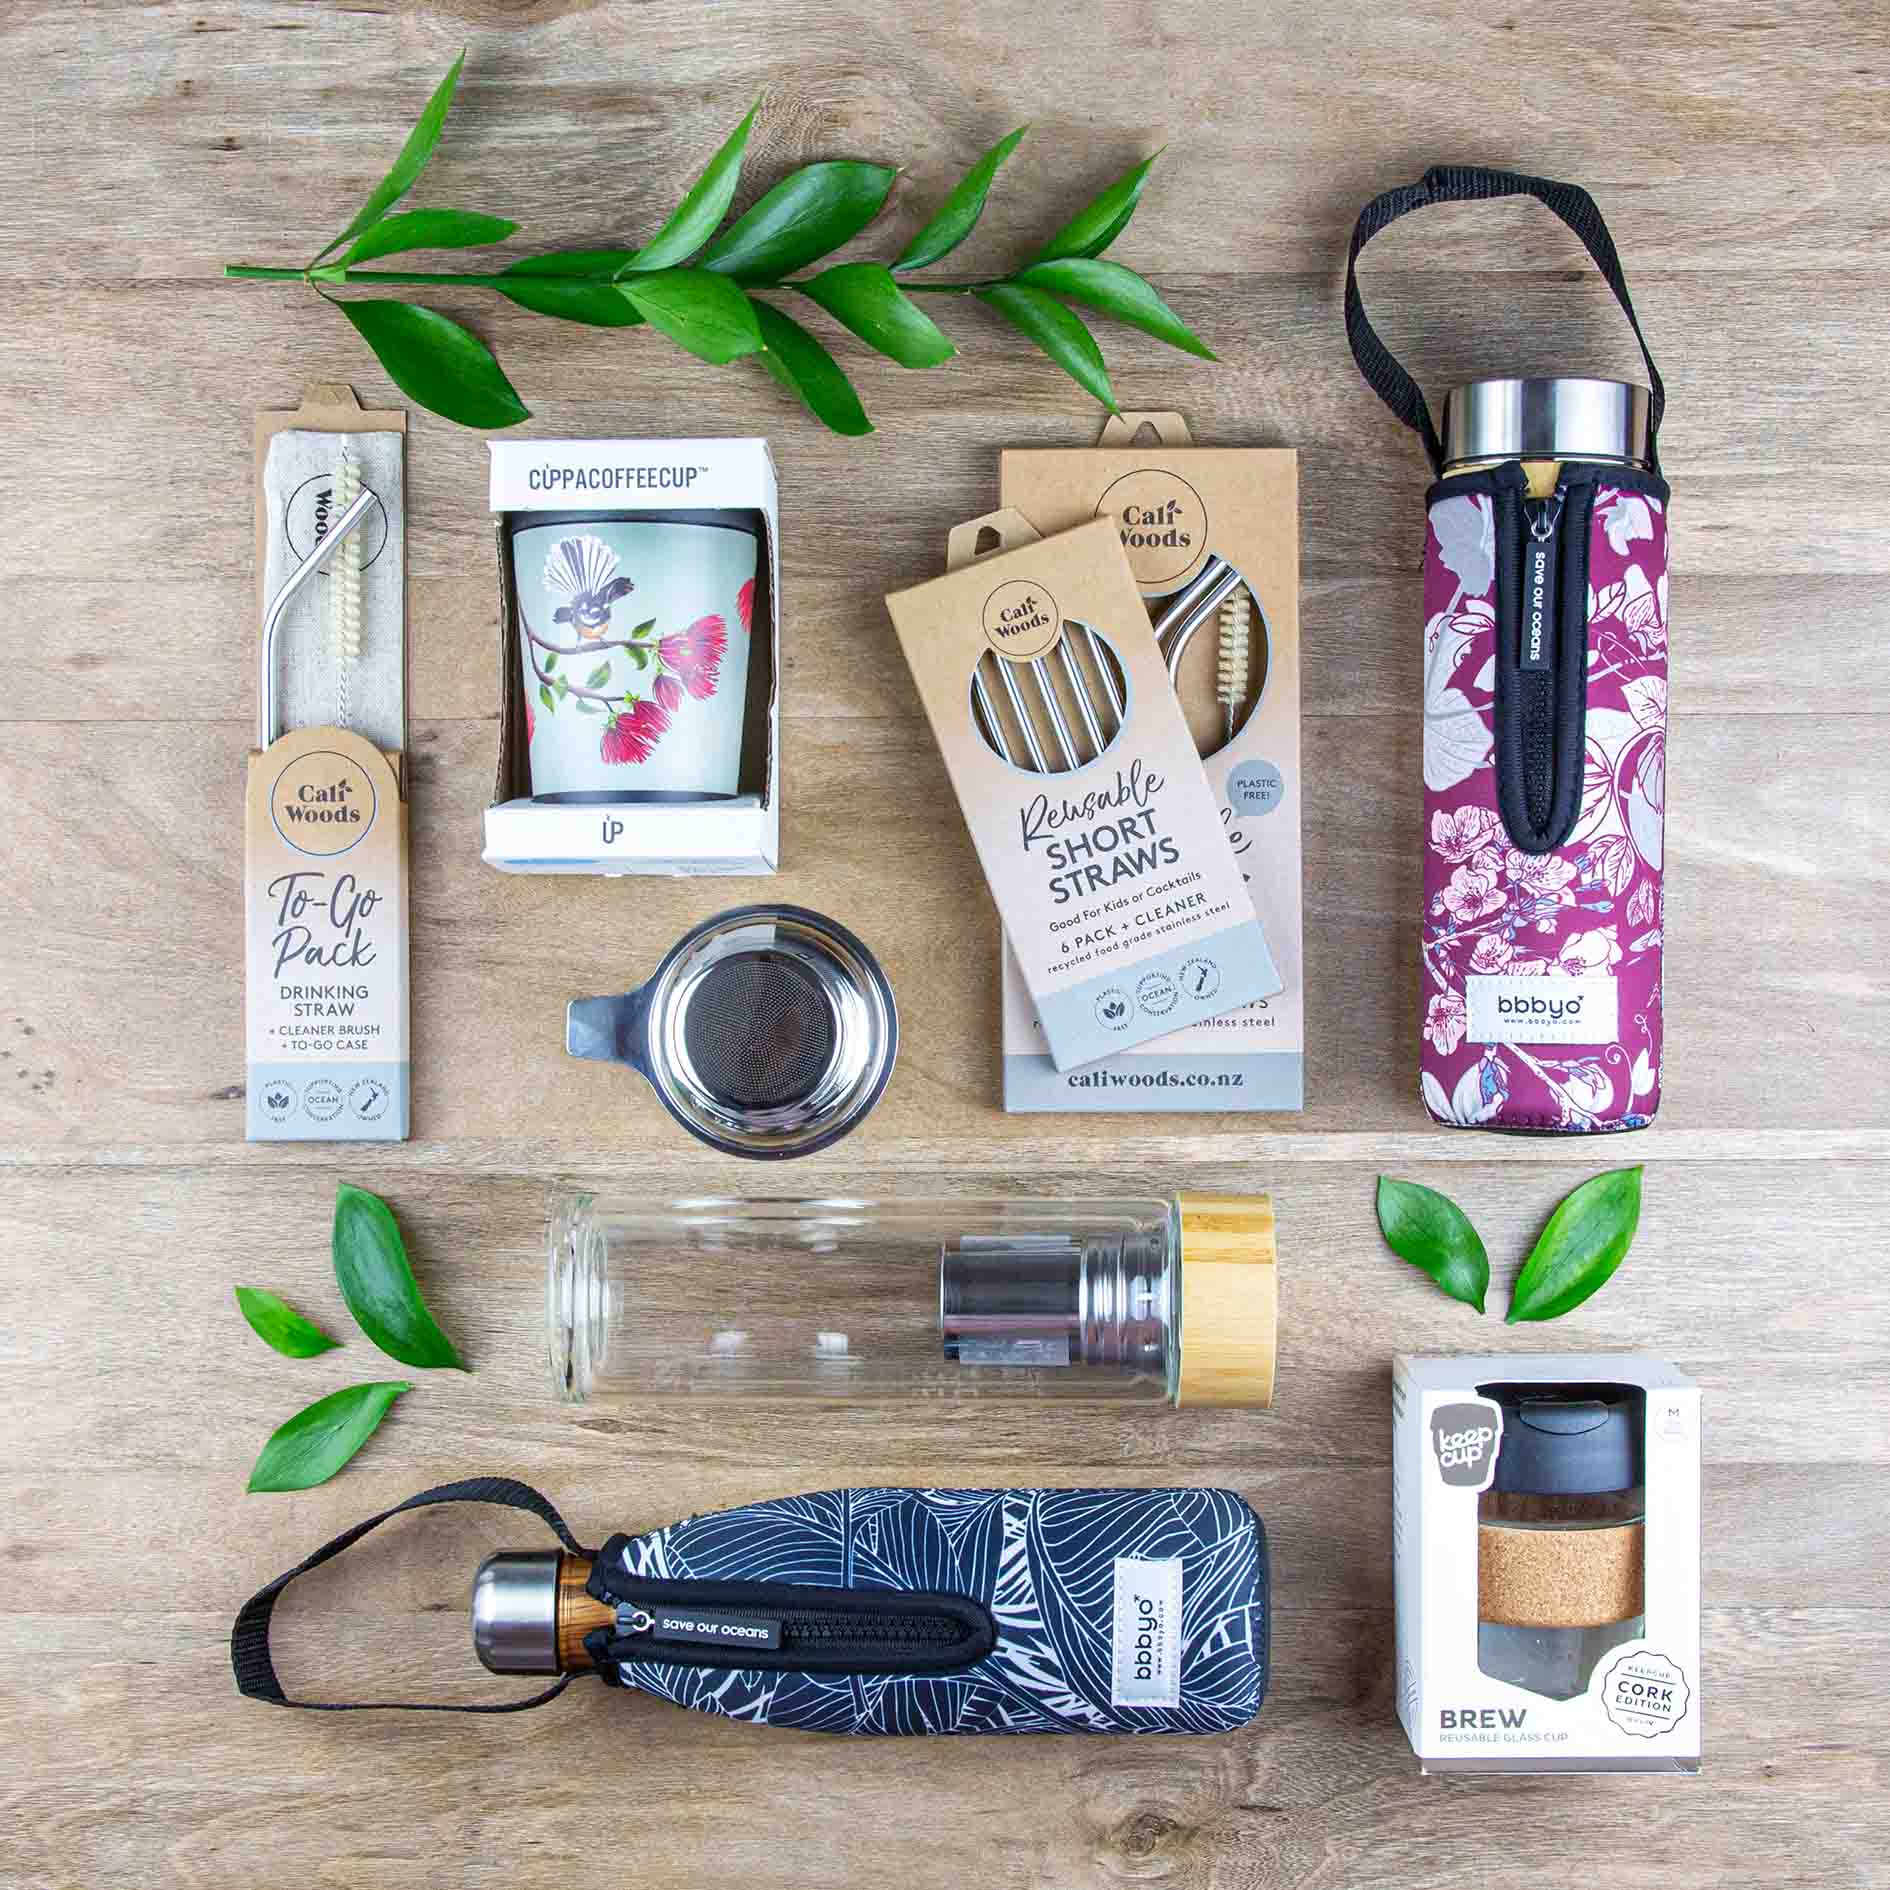 A selection of reusable drinkware such as coffee cups, water bottles, reusable straws, tea flasks and a tea infuser laid out nicely on a wooden floor.